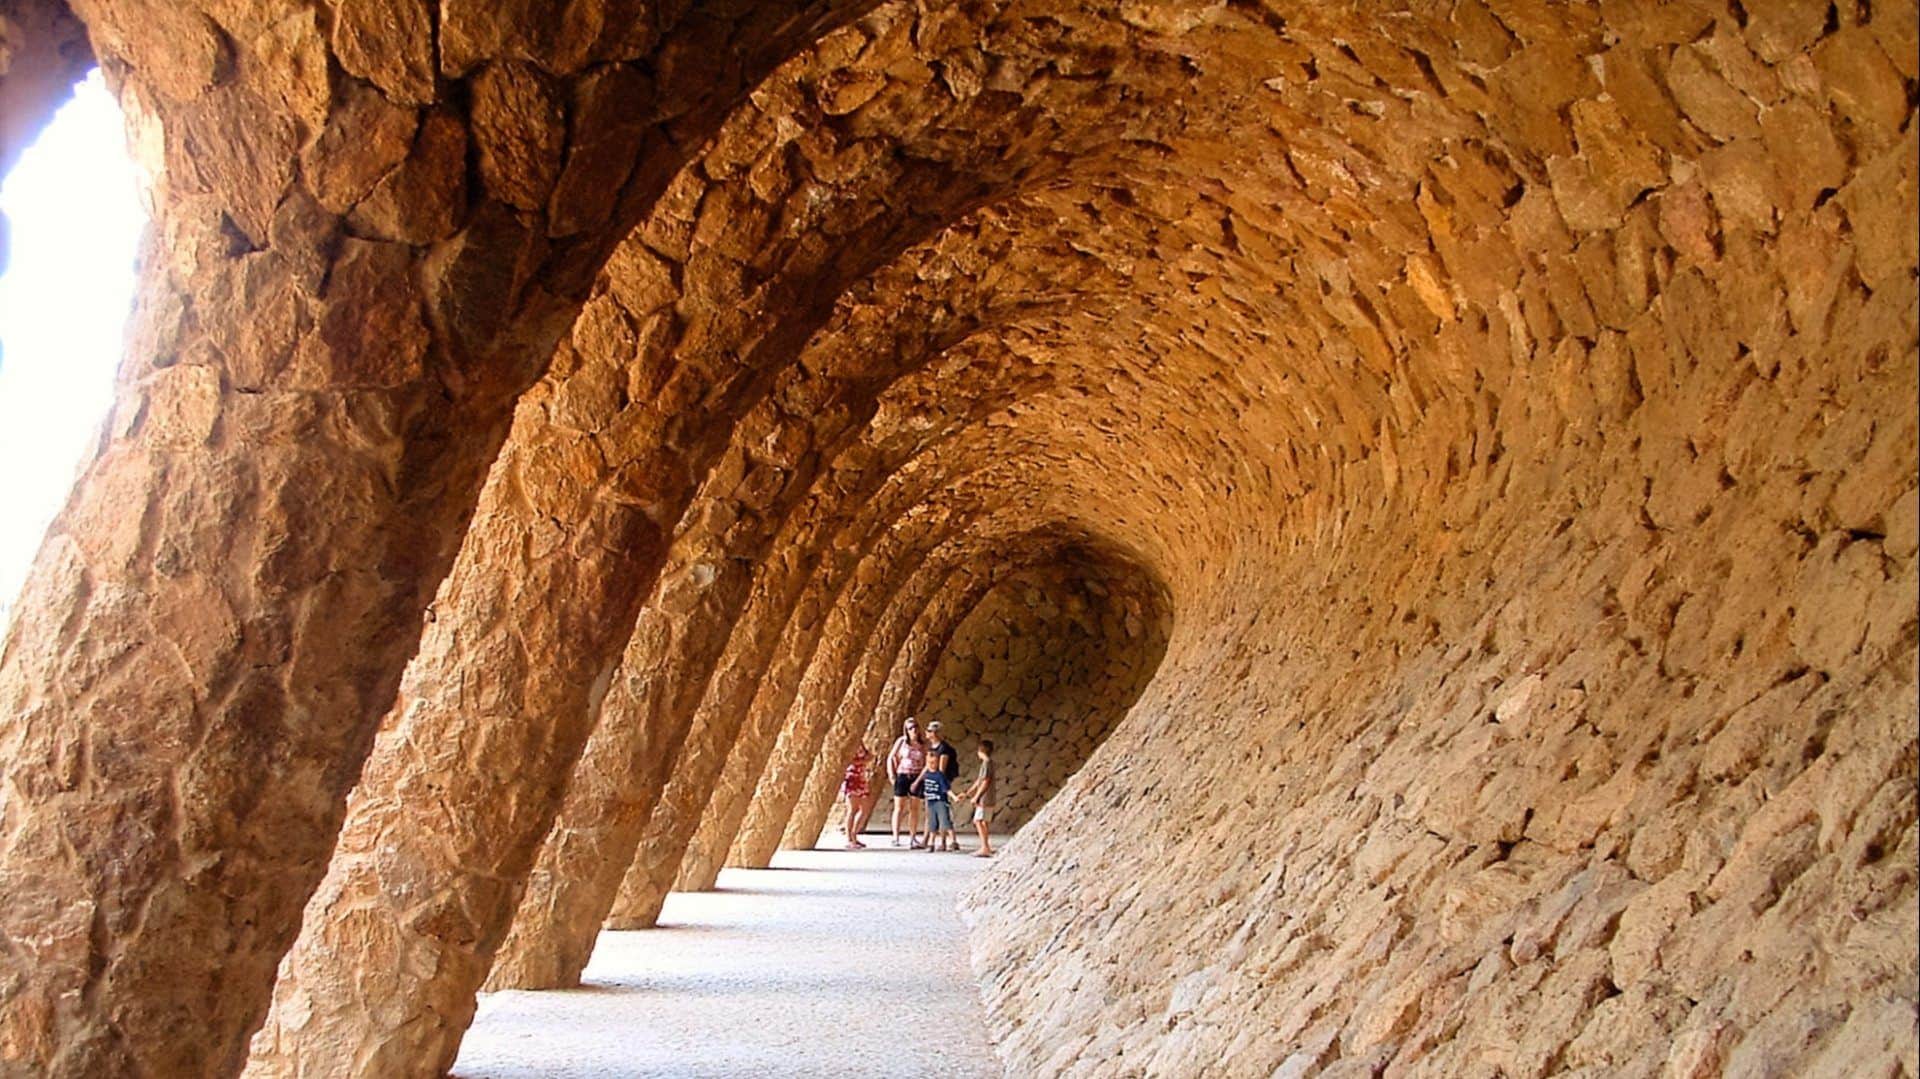 Park Güell Small Group Guided Tour - In out Barcelona Tours